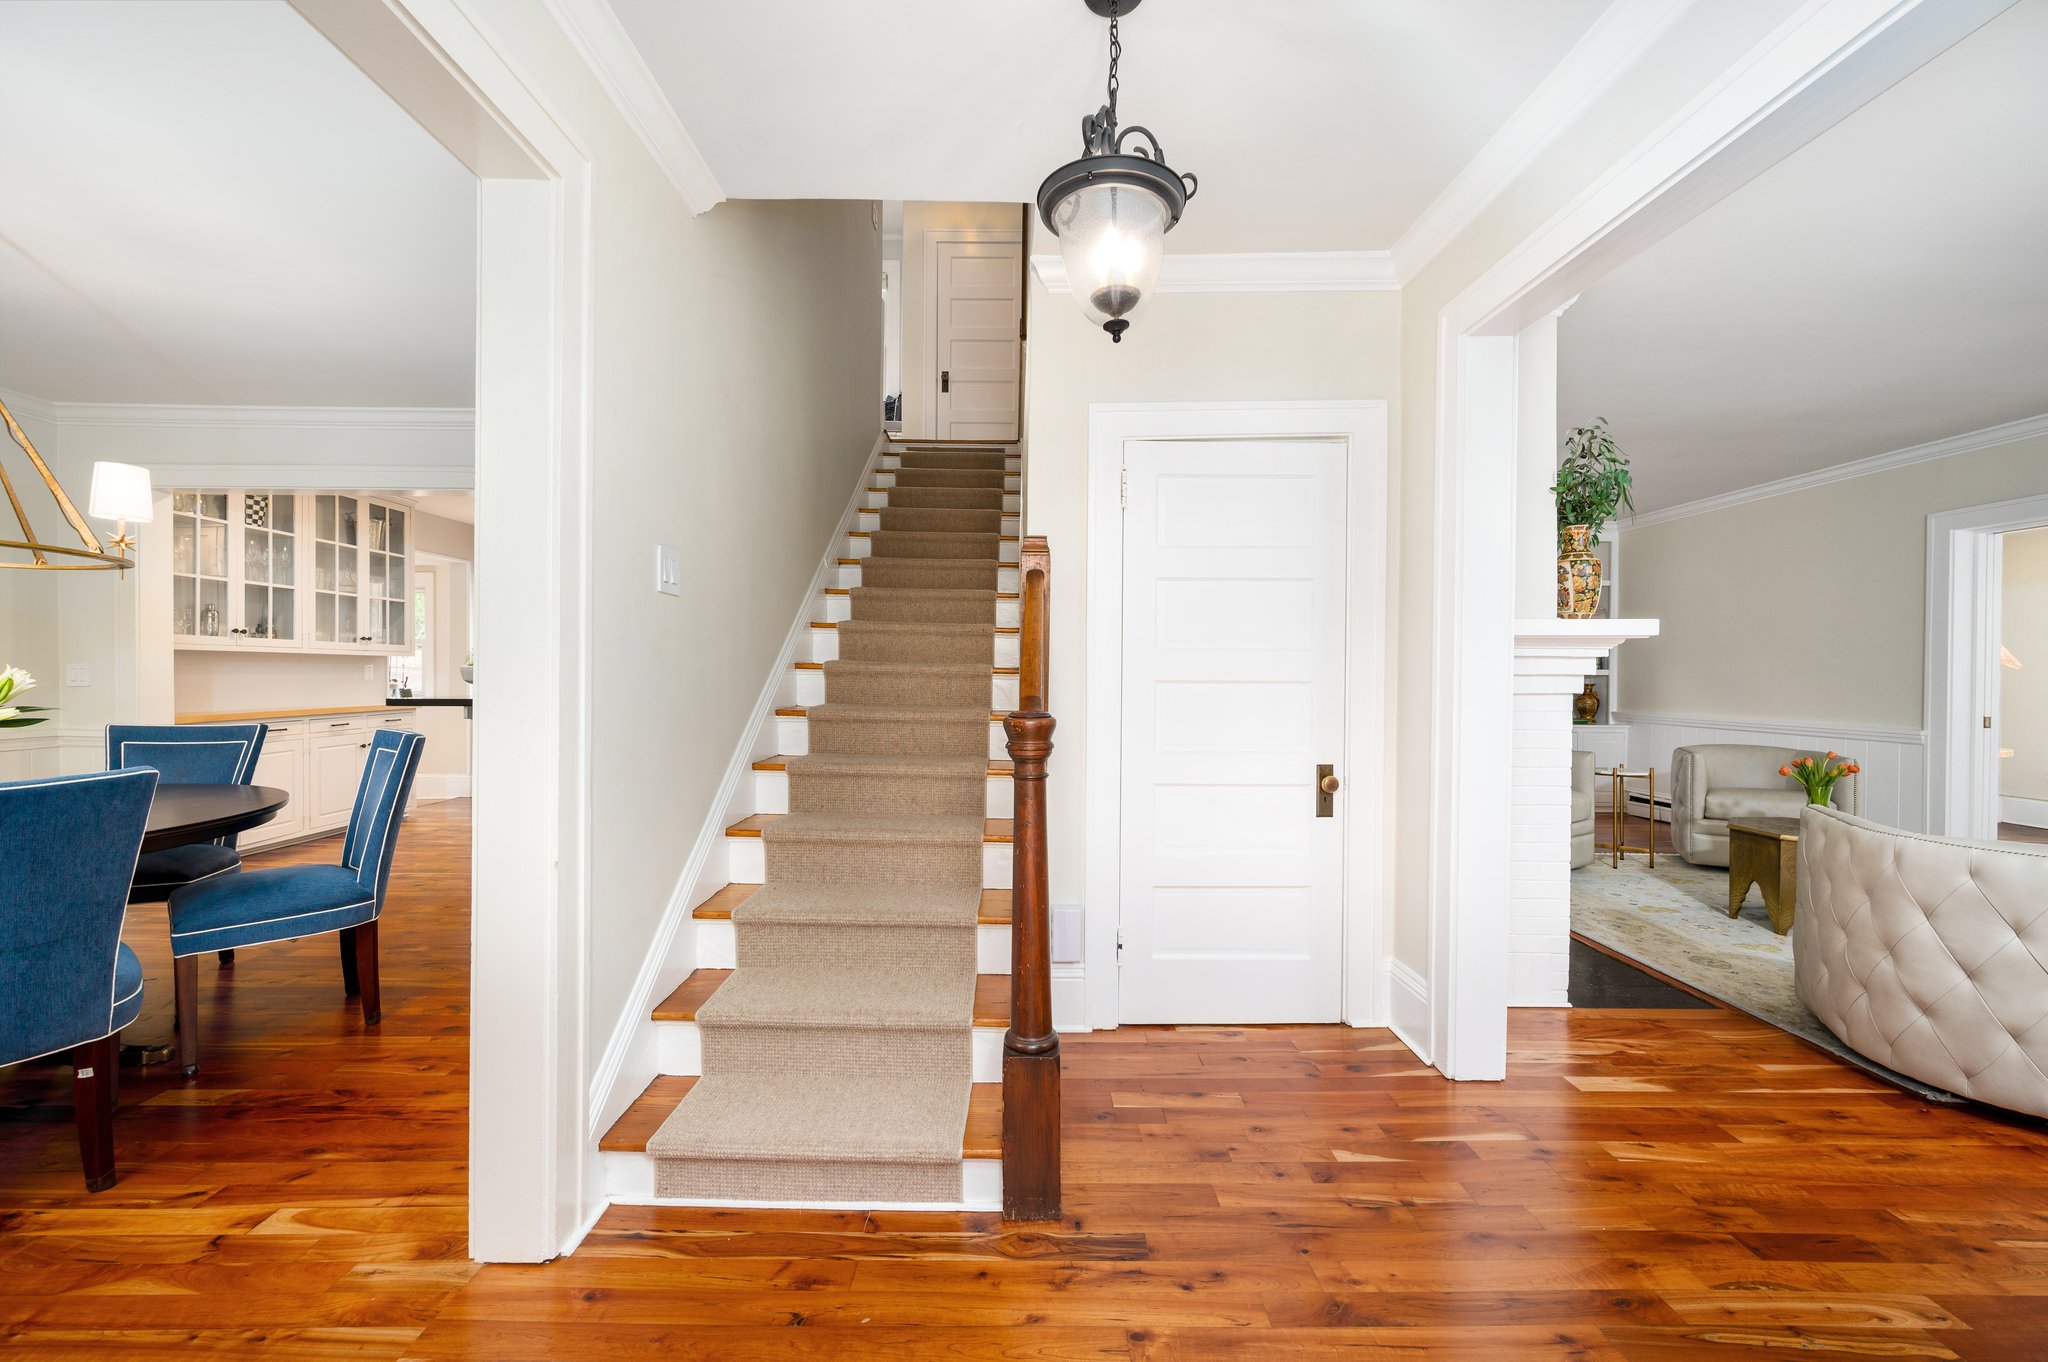 Spacious Formal Entry Leads to Upper Level